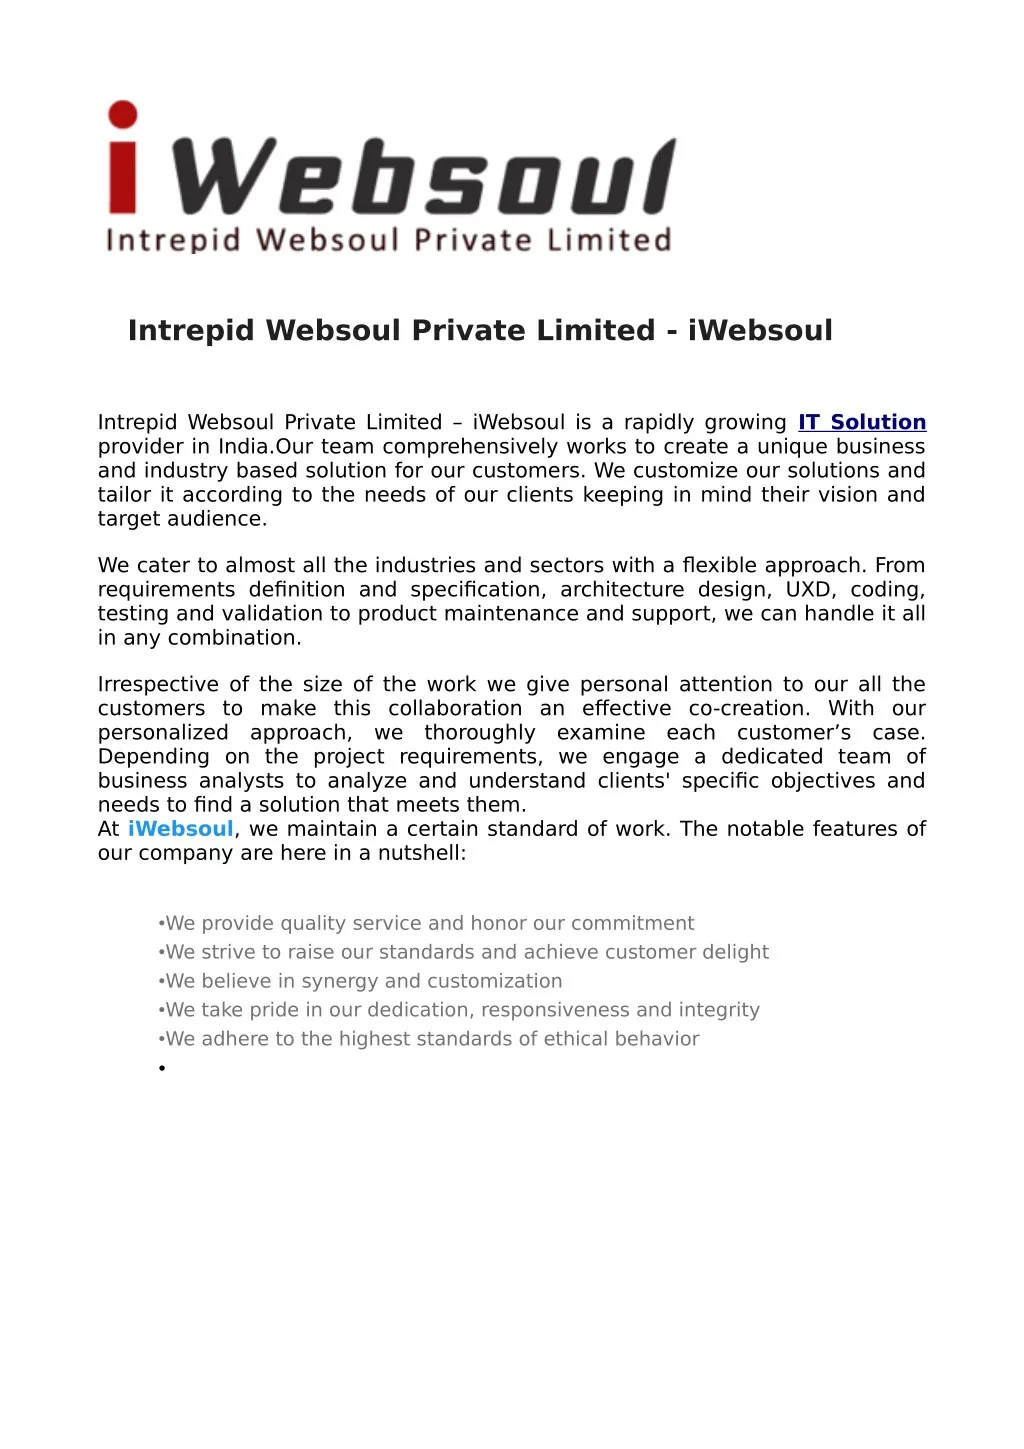 intrepid websoul private limited iwebsoul